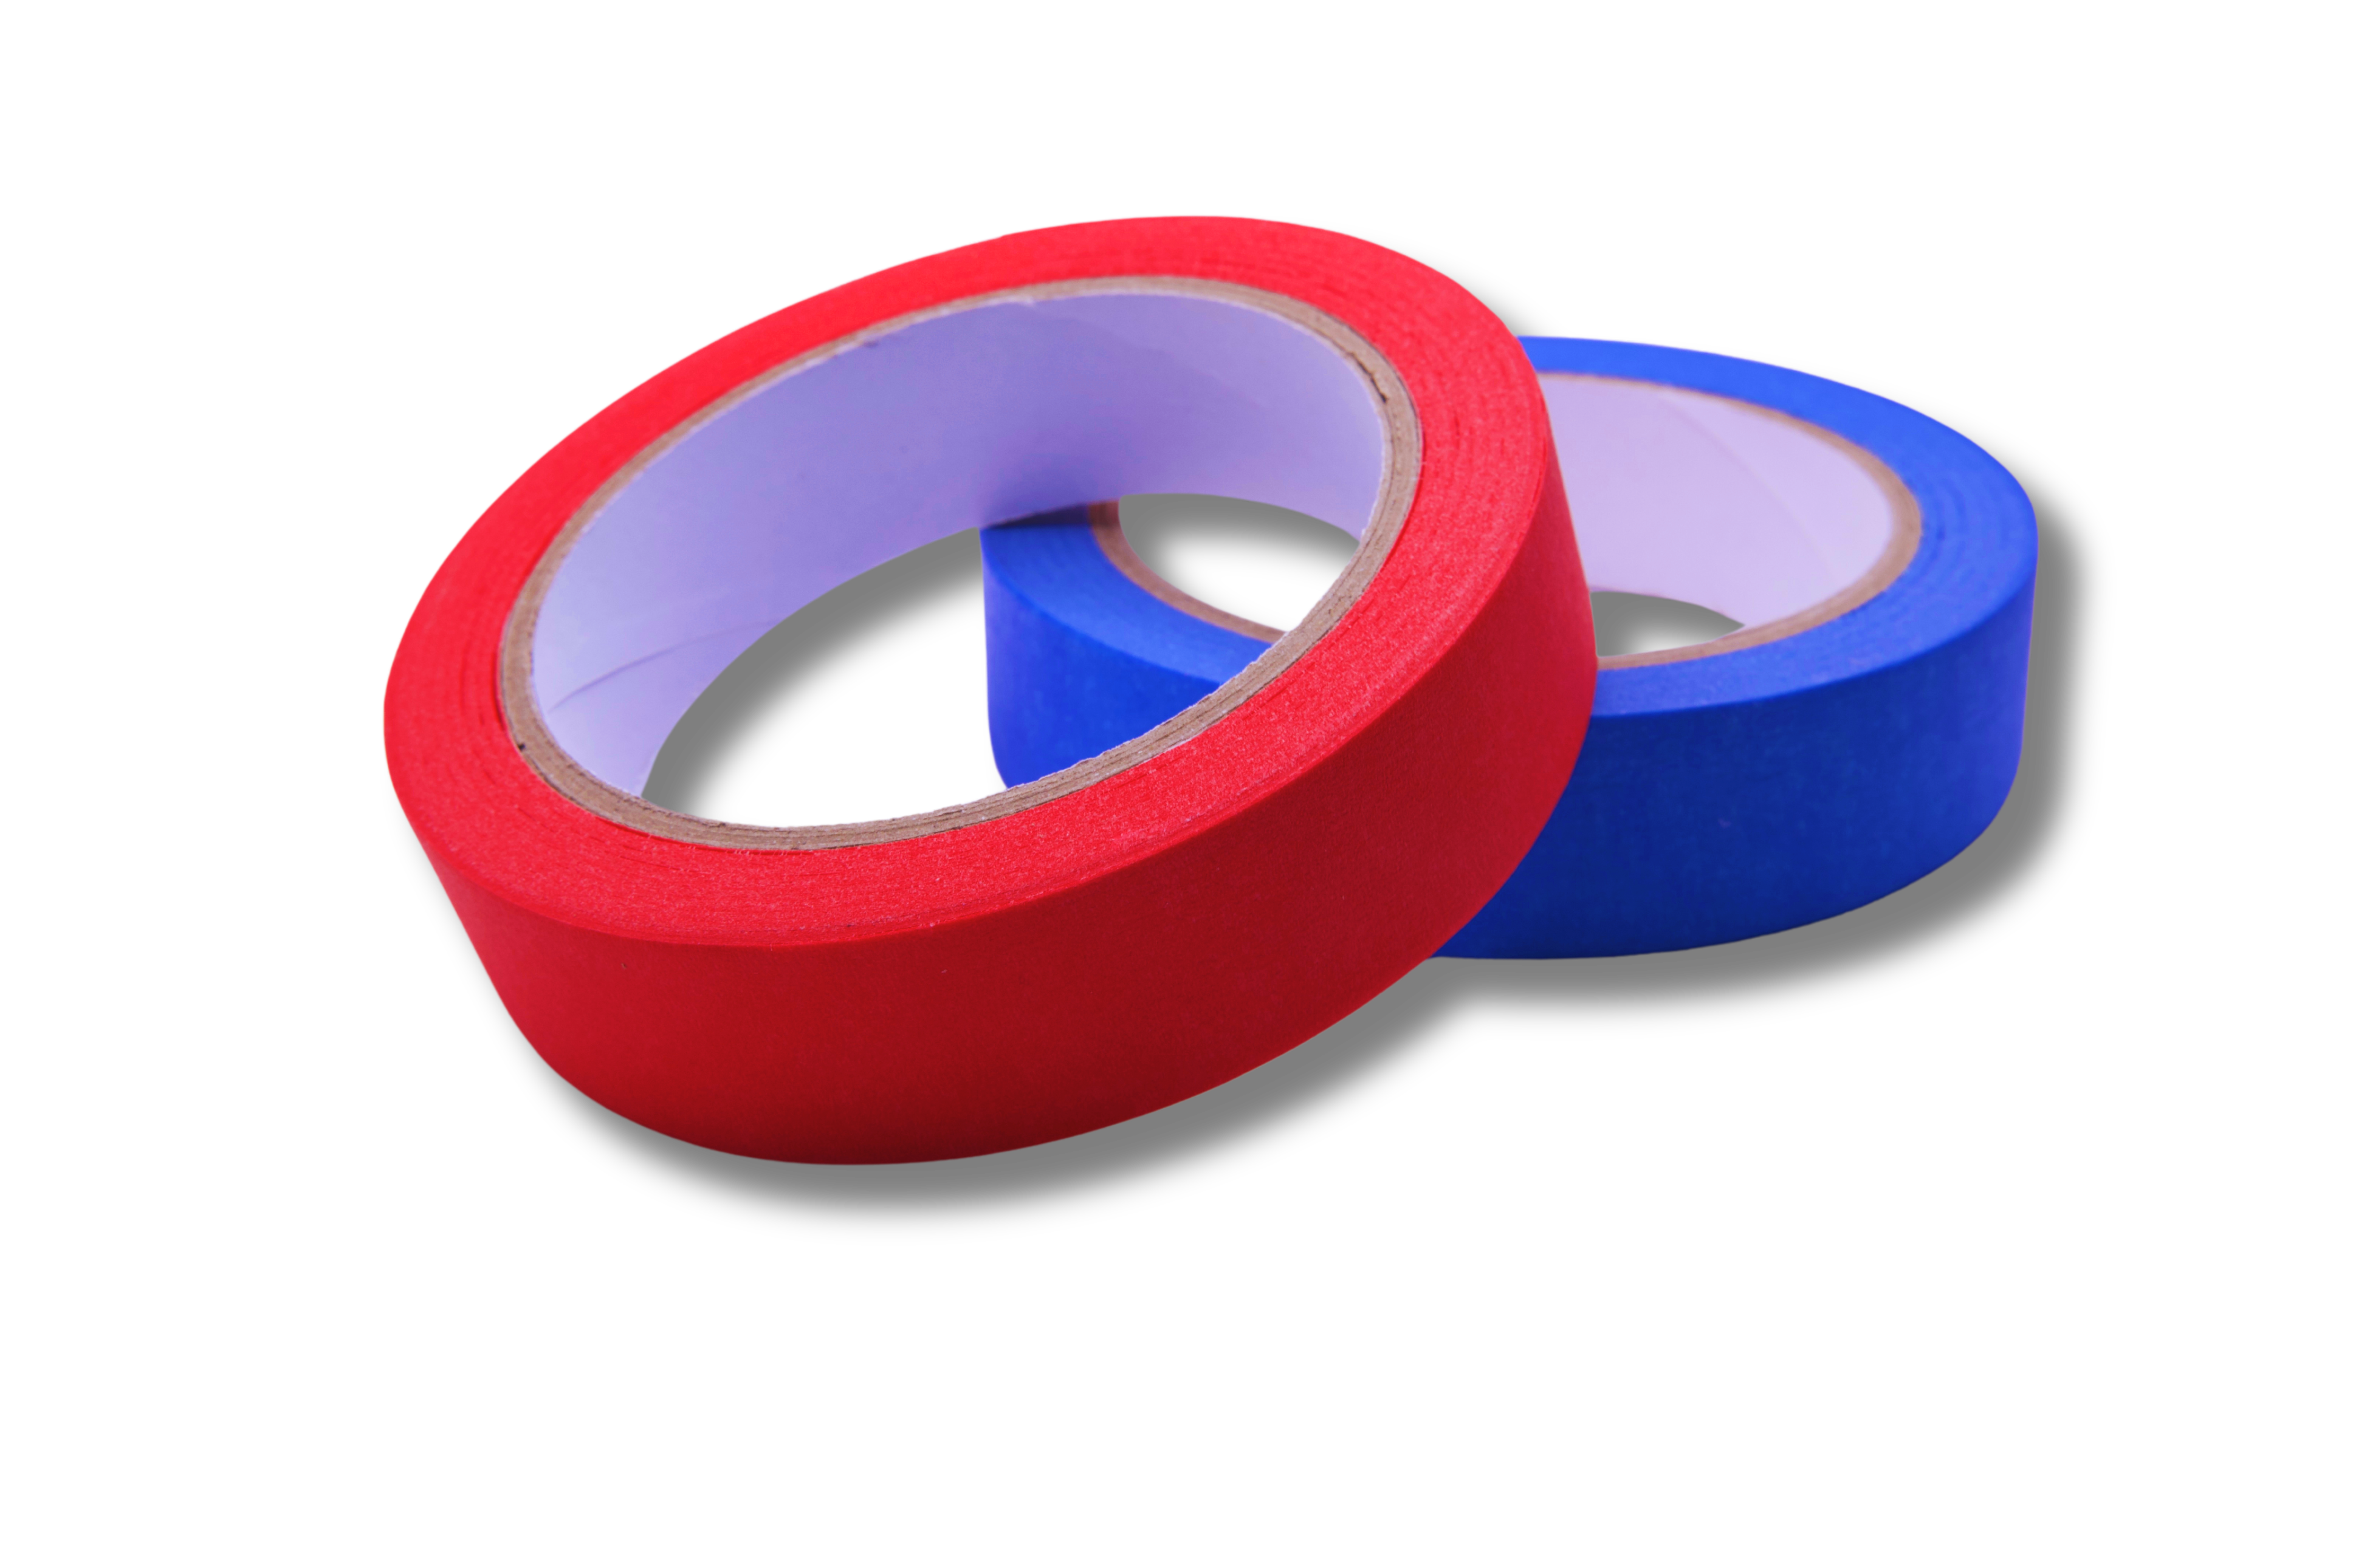 Two rolls of Precision Masking Tape, one red and one blue, demonstrating the tape's versatility for various projects.